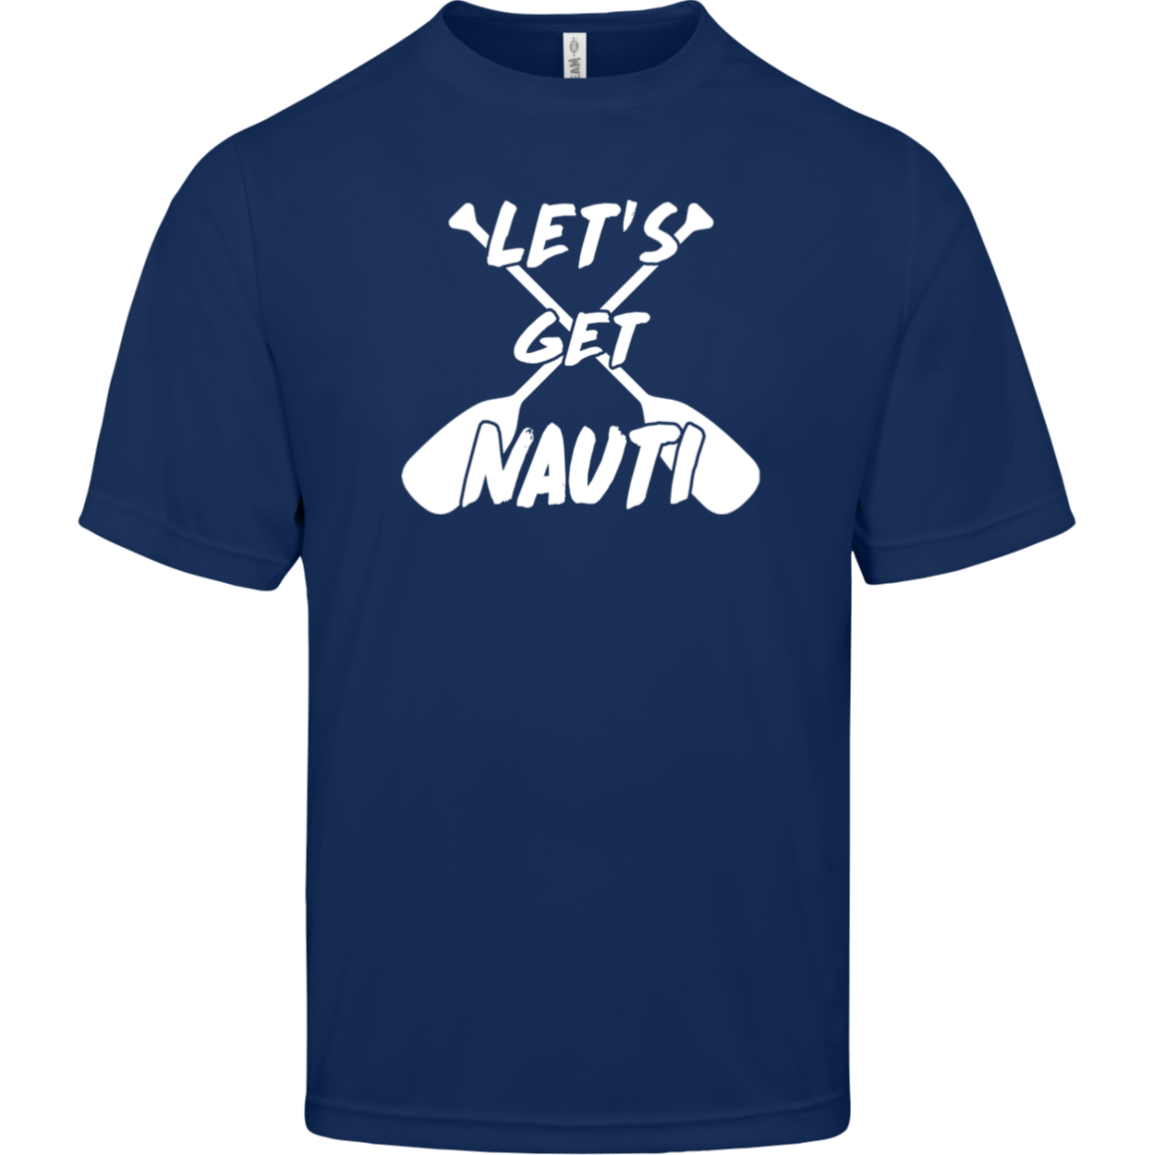 ***2 SIDED***  HRCL FL - Lets Get Nauti - - 2 Sided - UV 40+ Protection TT11 Team 365 Mens Zone Tee